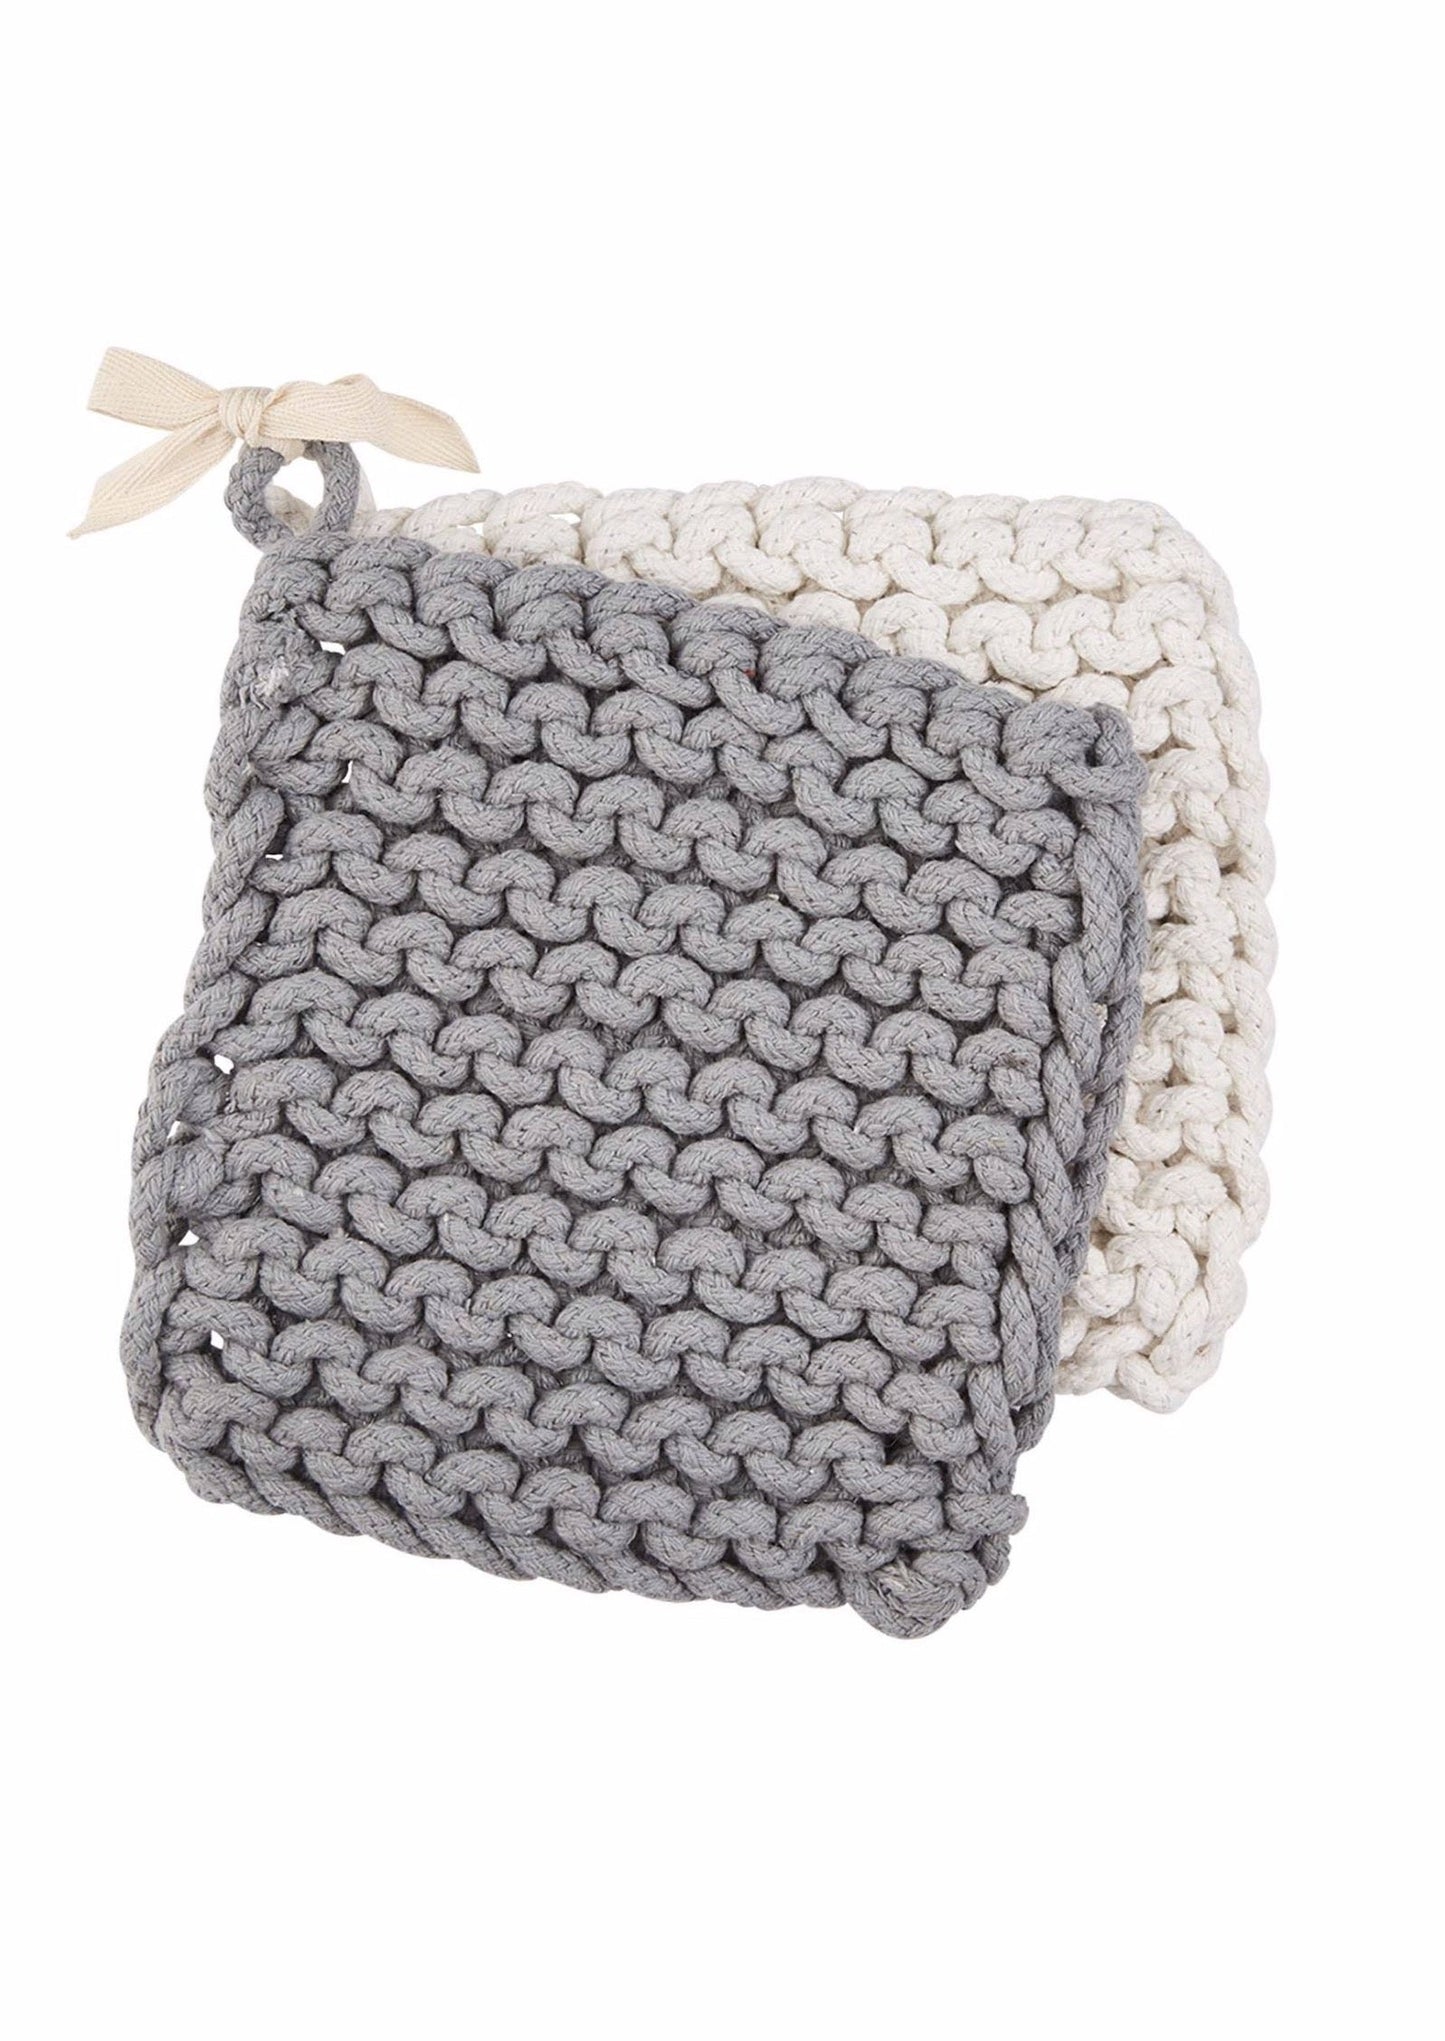 Gray Crocheted Pot Holders - FINAL SALE Home & Lifestyle